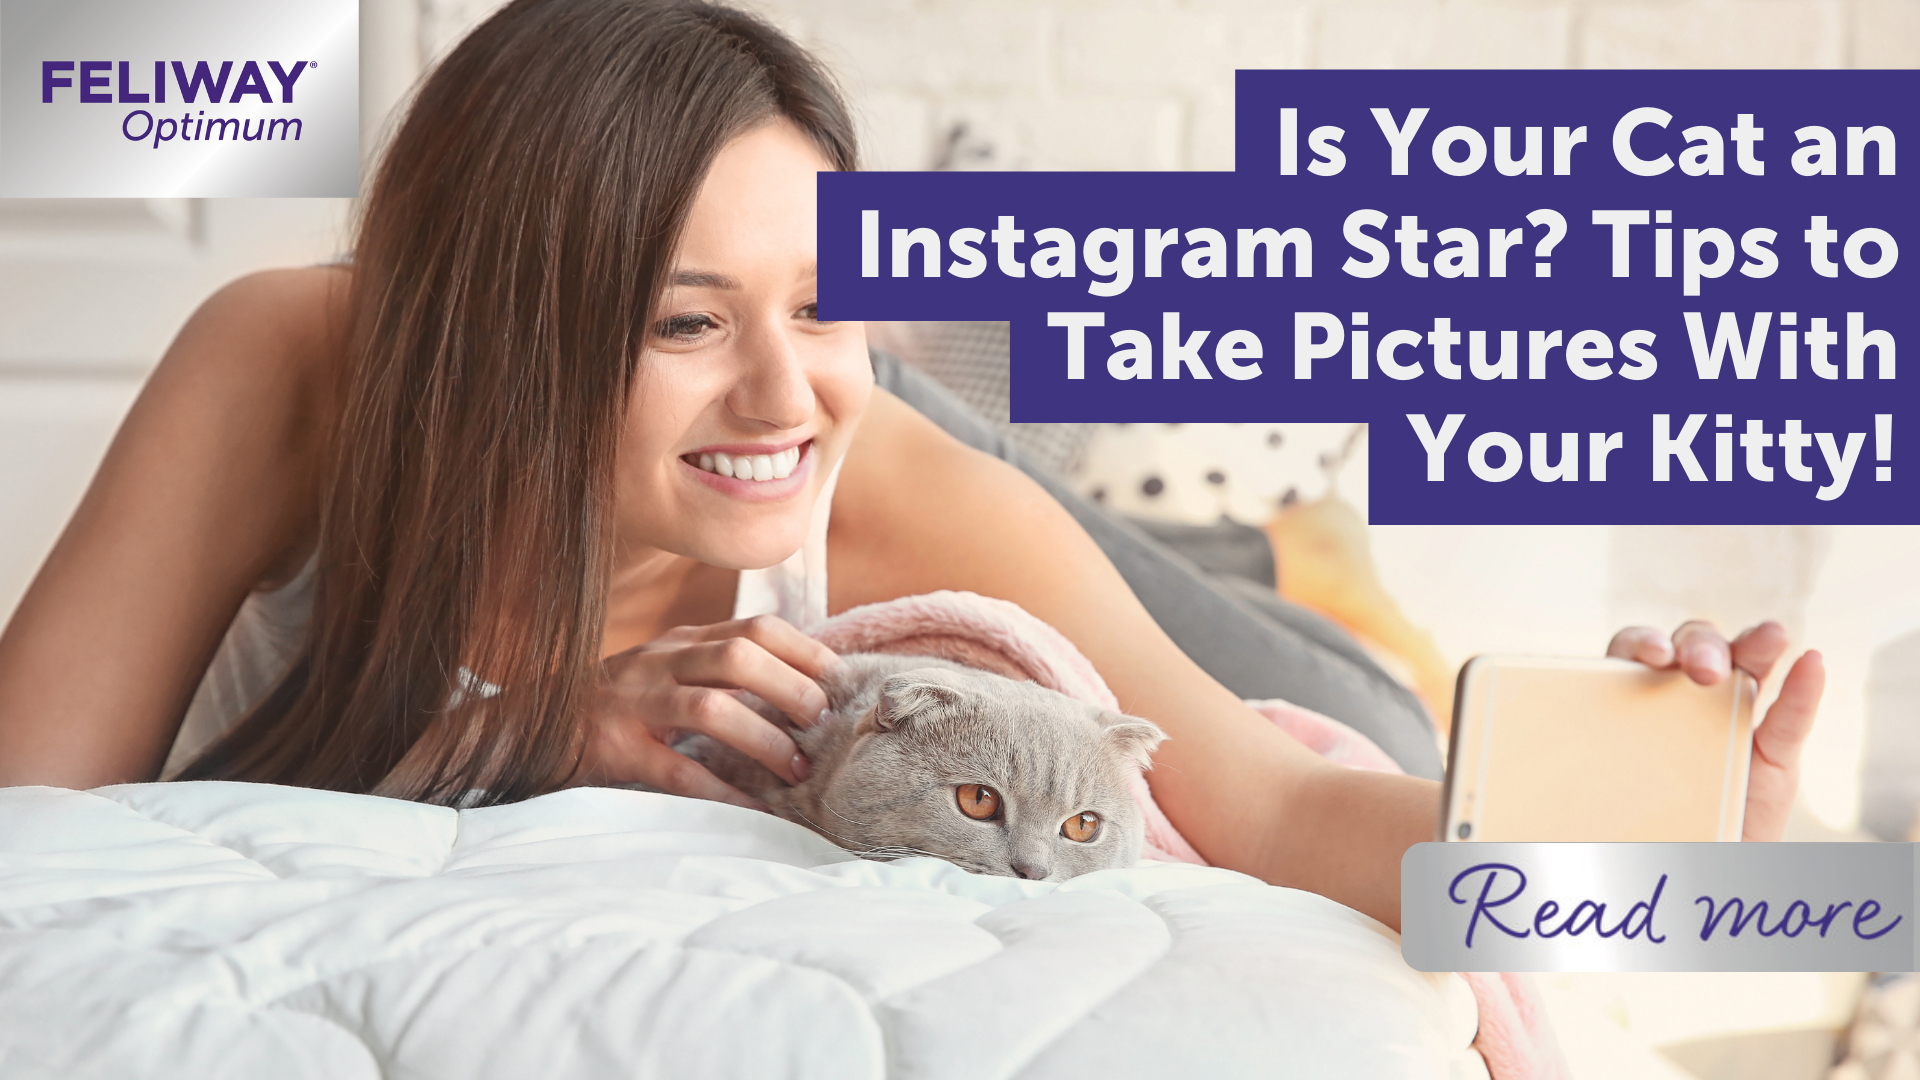 Your Cat is an Instagram Star? Tips to Take Pictures With Your Kitty!